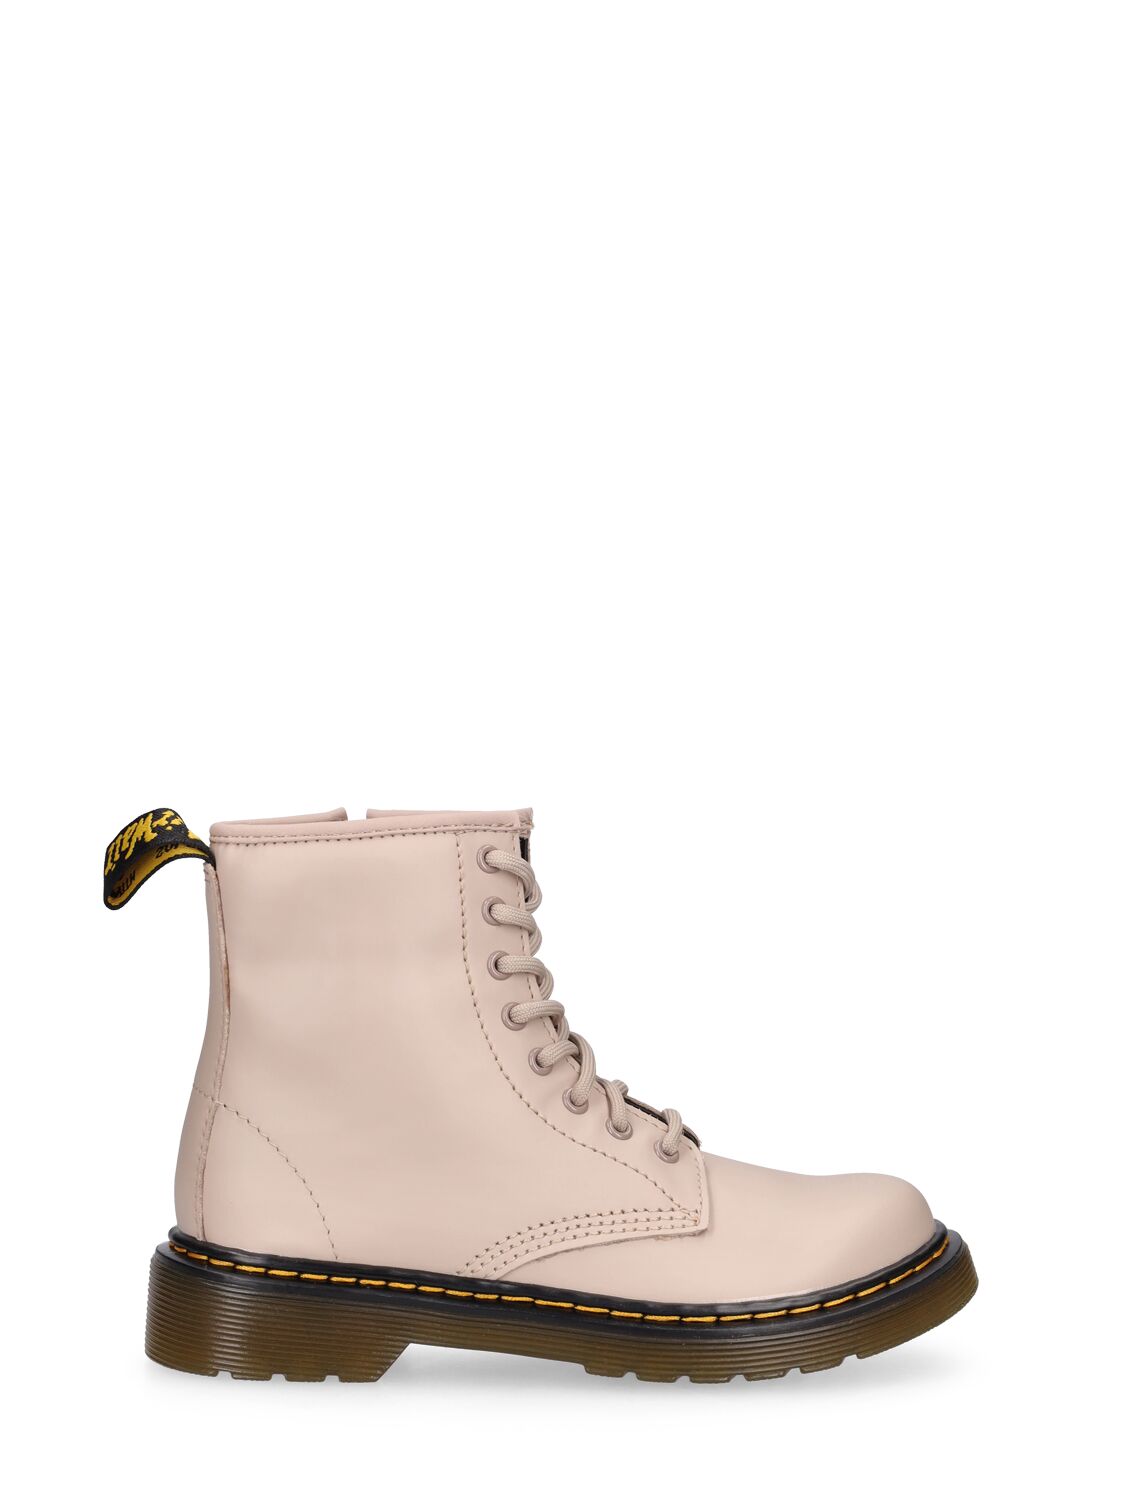 Dr. Martens' Kids' 1460 Leather Boots In Neutral